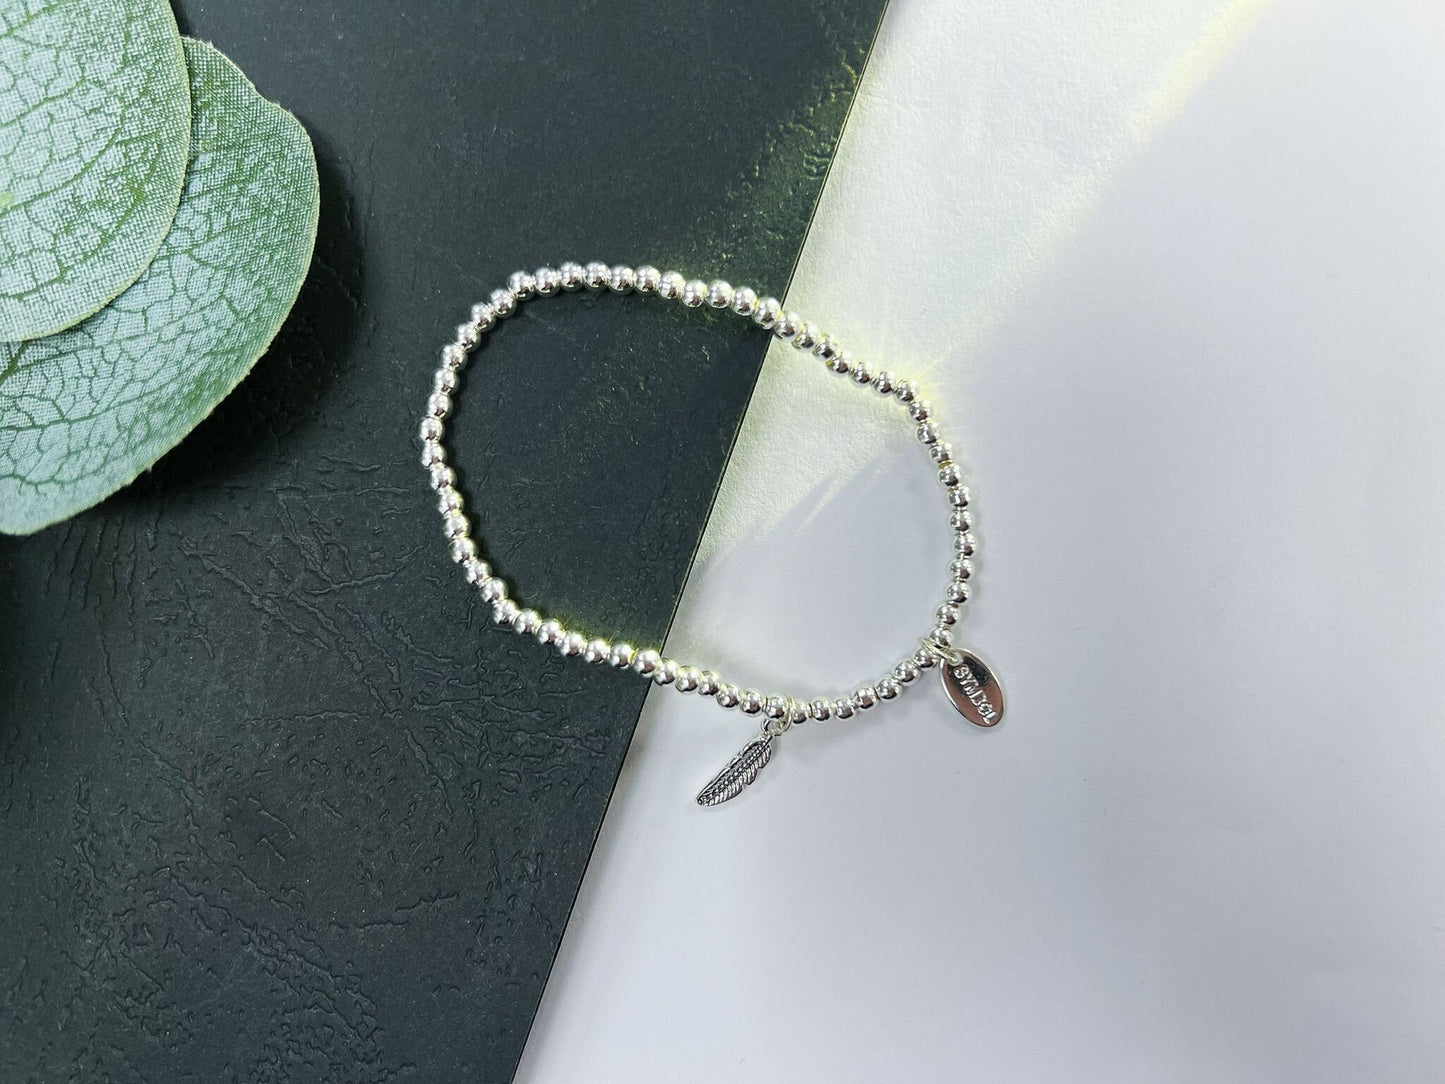 Silver Beads Feather Kids Bracelet, Silver Dream Charm Woman Elastic beaded Bracelet Size S, Christmas Gift For Her,Stocking Fillers